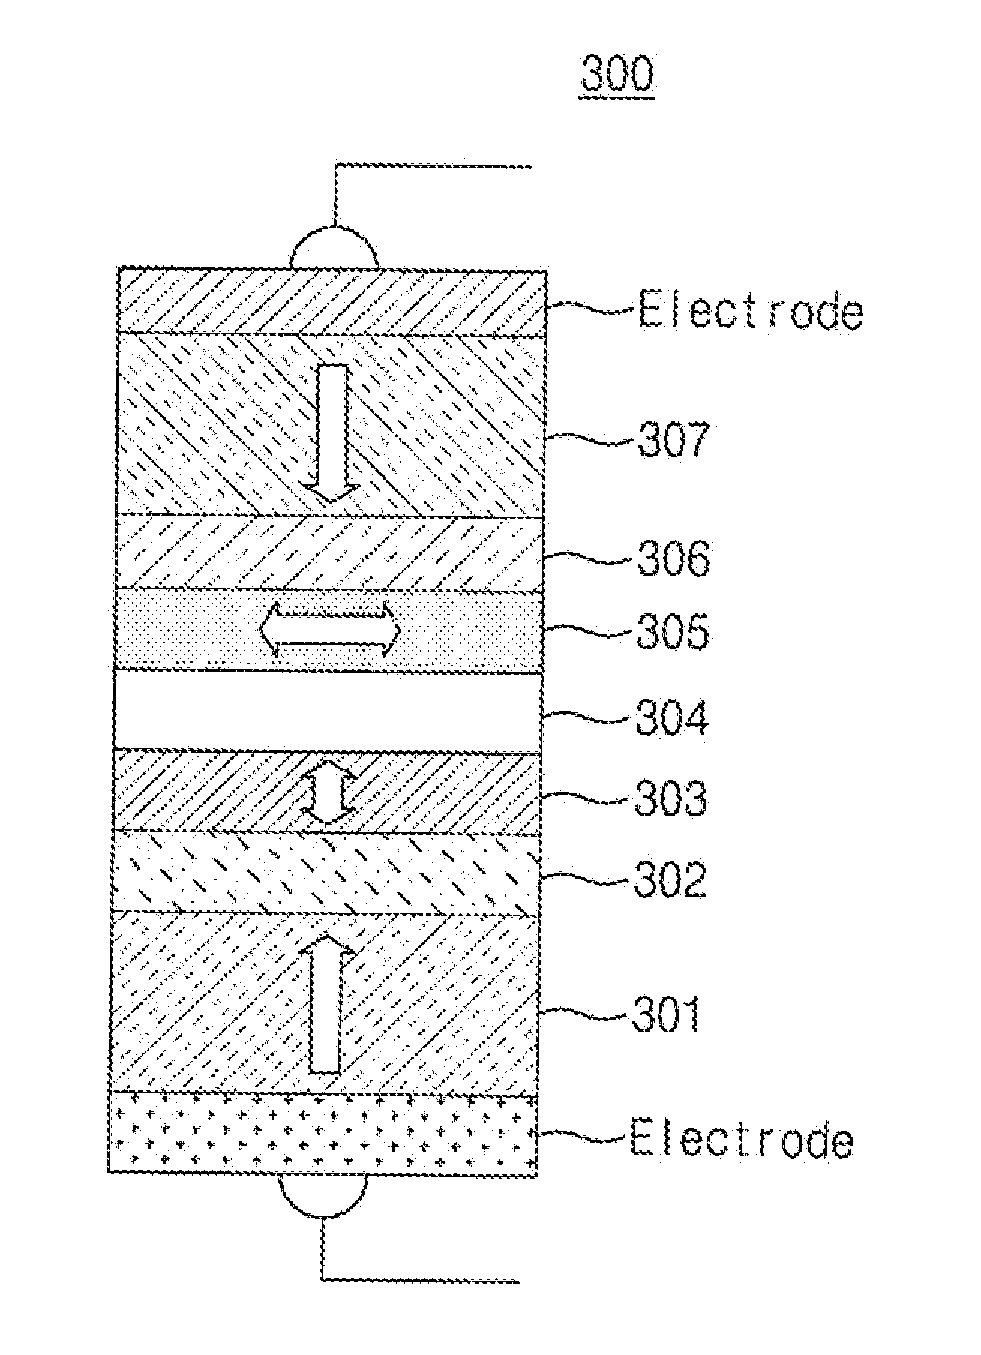 Spin transfer torque magnetic memory device using magnetic resonance precession and the spin filtering effect